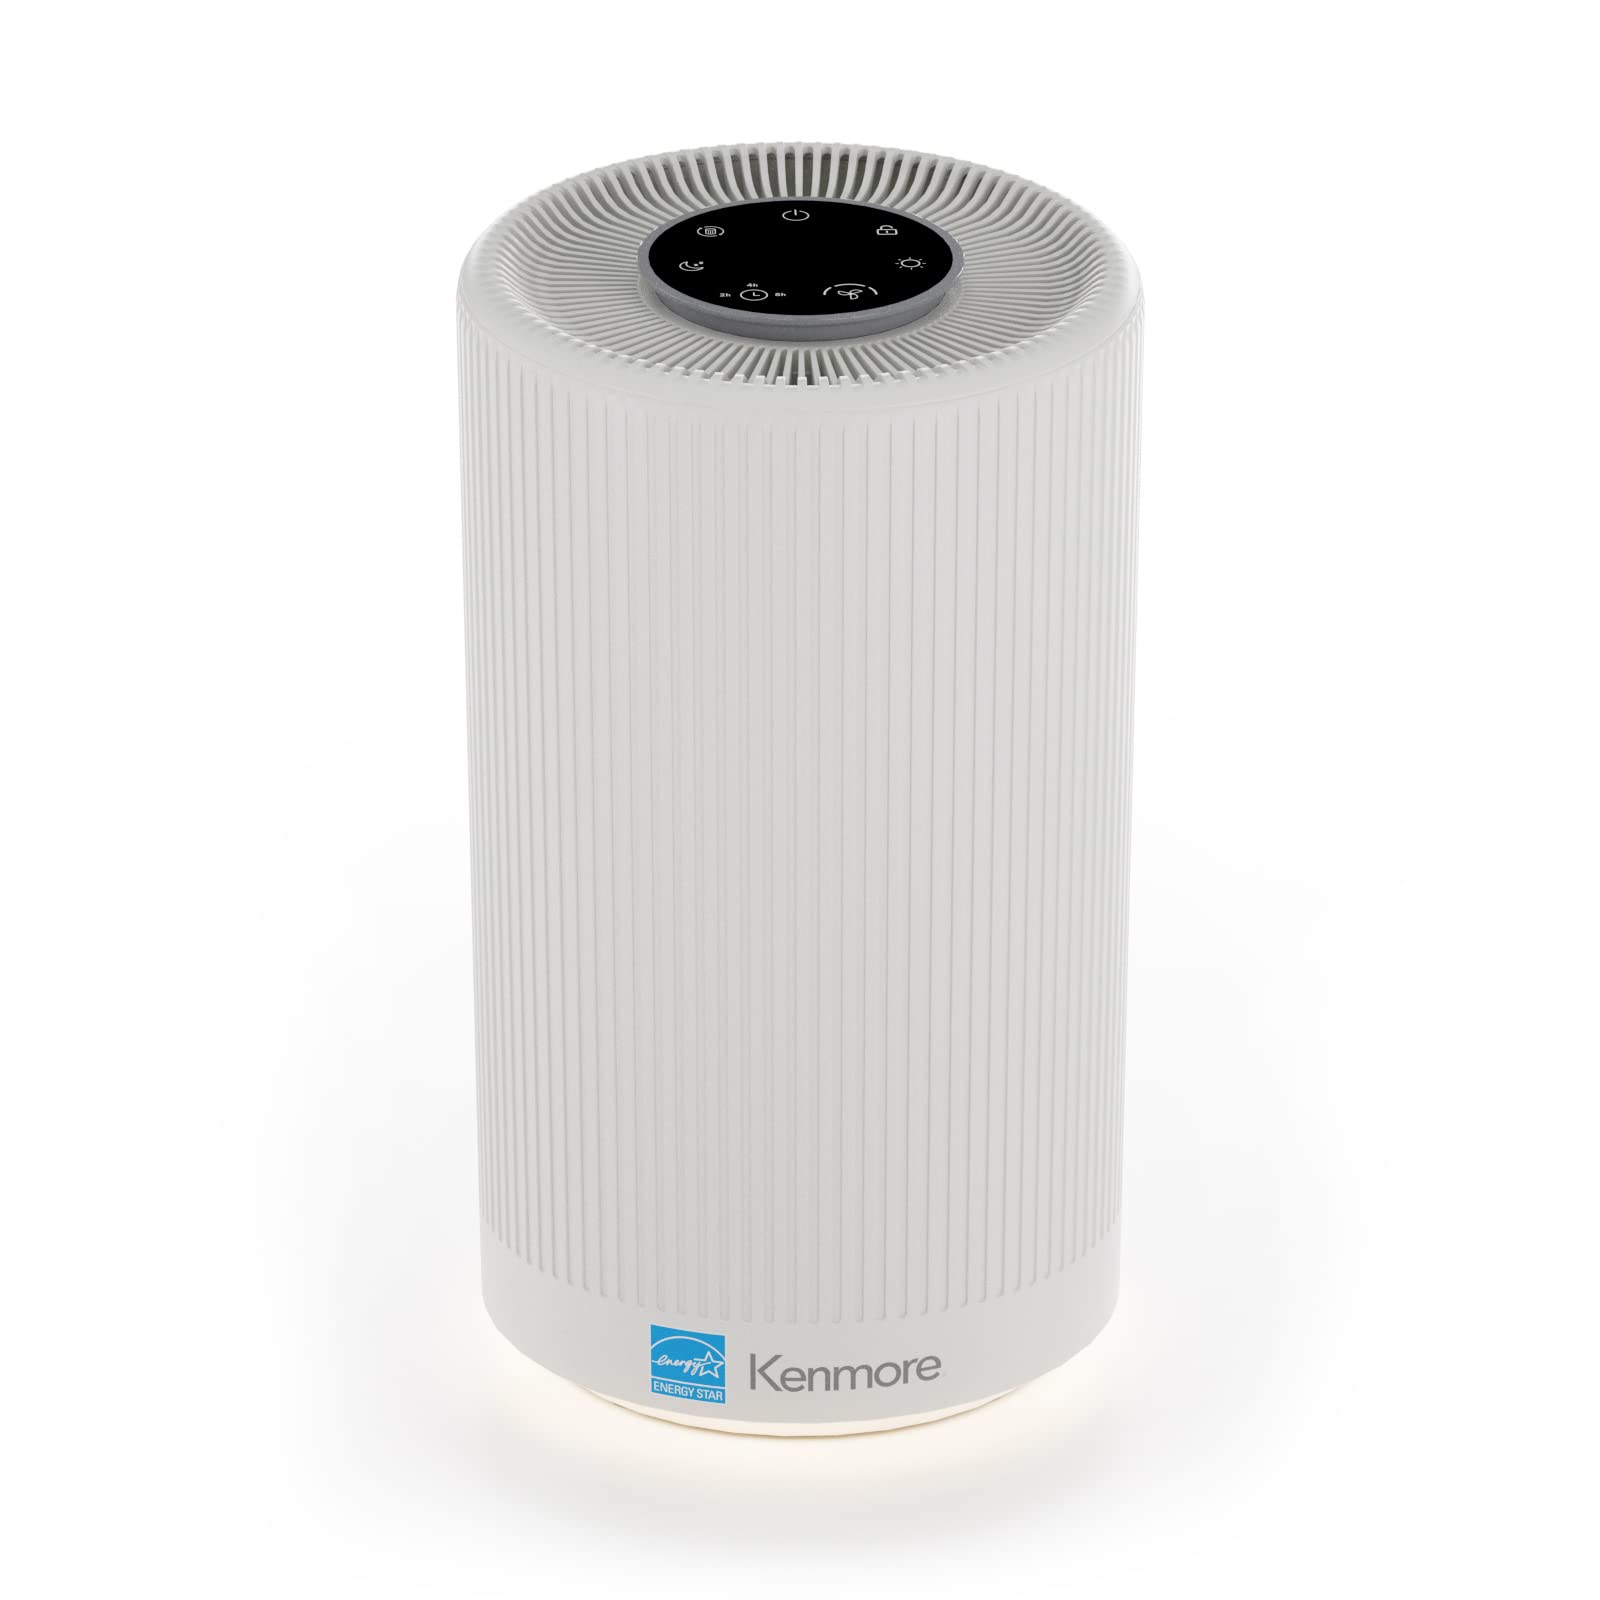 Kenmore PM1005 Air Purifier with H13 True HEPA Filter, Covers Up to 850 Sq.Foot, 25db SilentClean 3-Stage HEPA Filtration System for Office & Bedroom